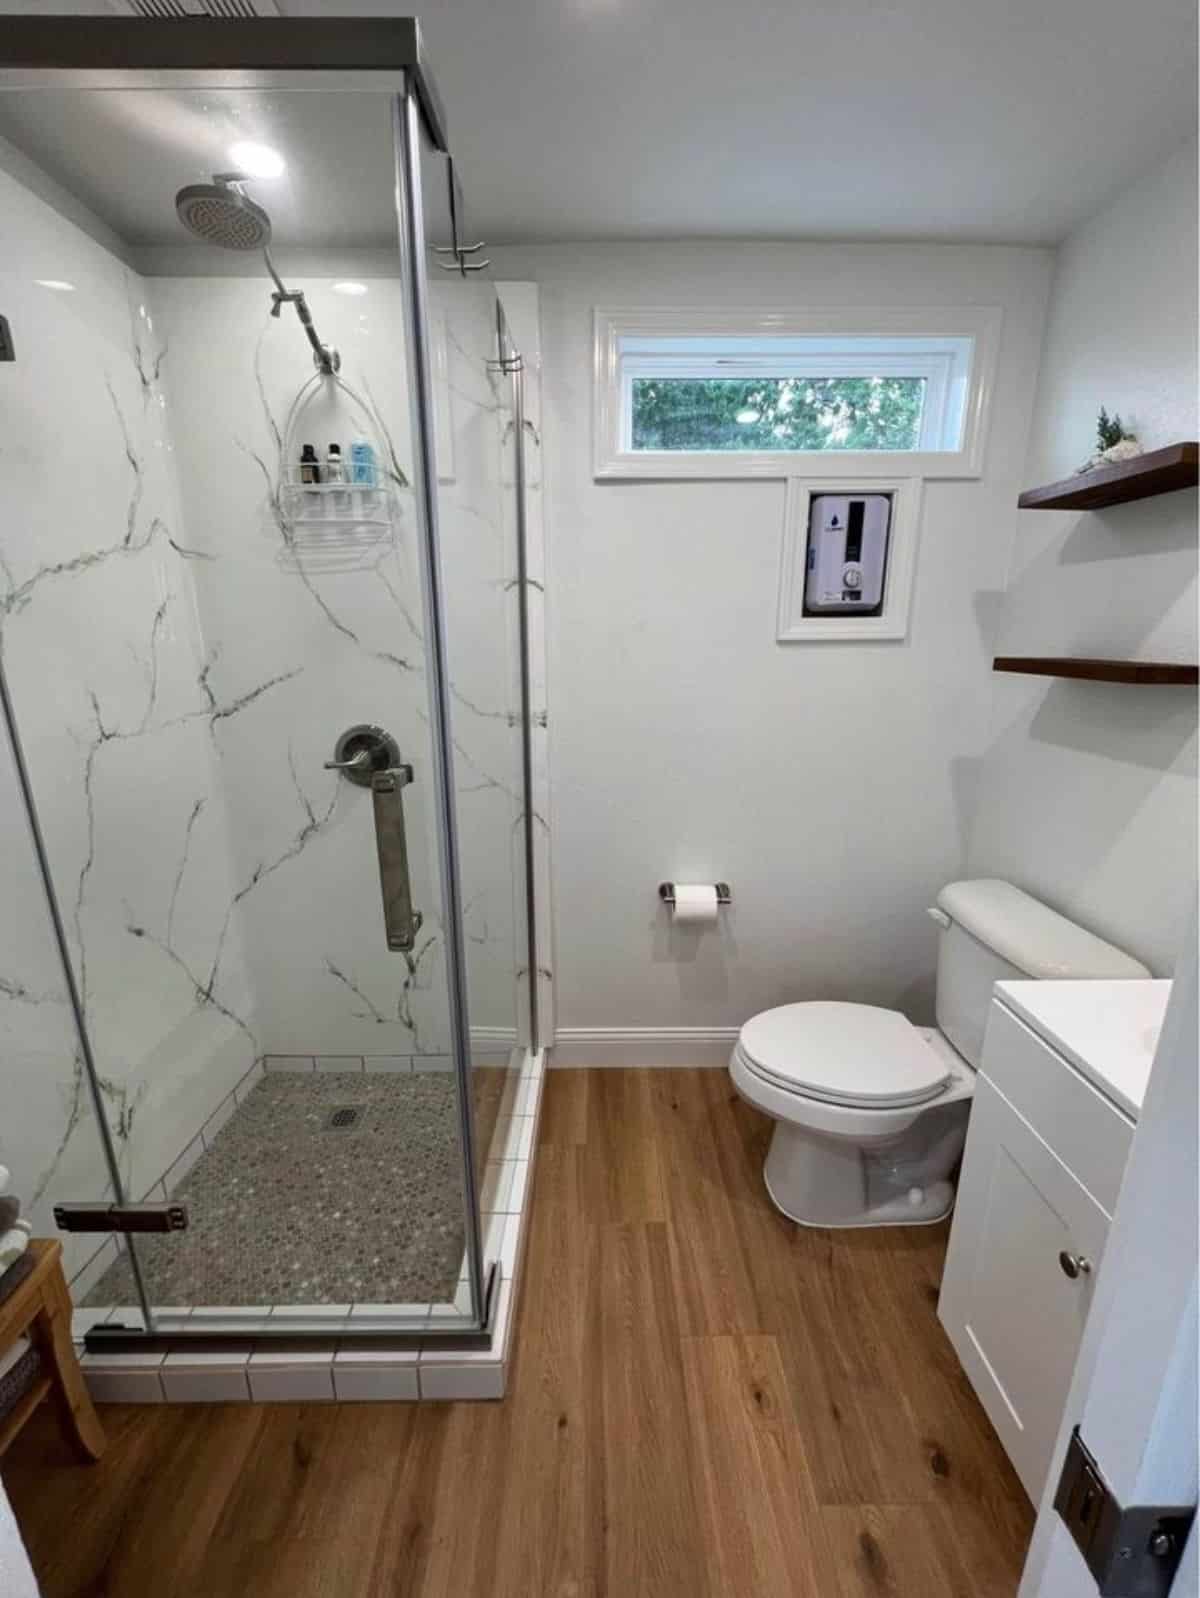 bathroom of affordable tiny home has all the standard fittings and separate shower with glass enclosure